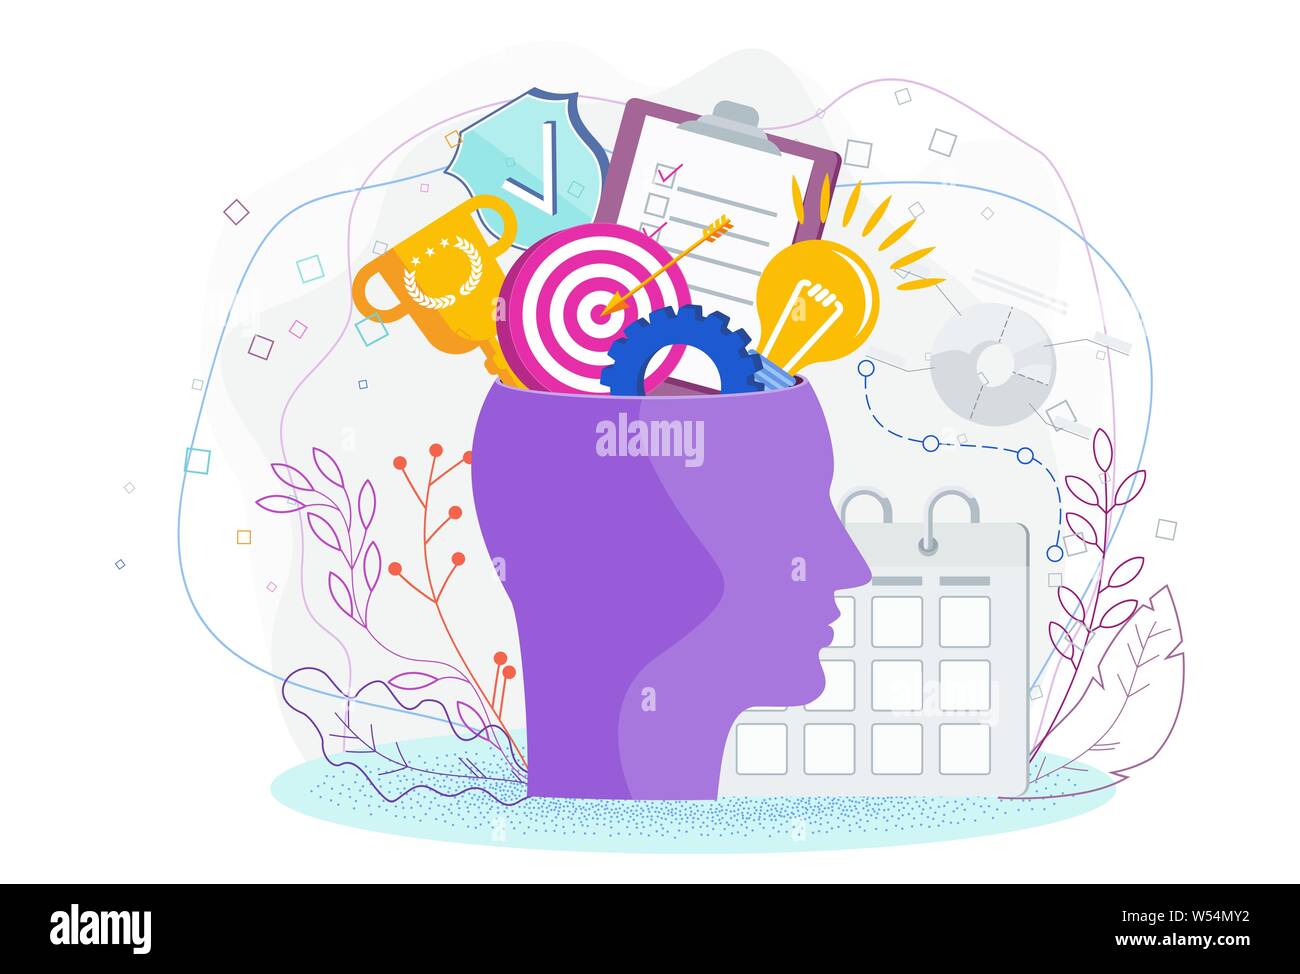 Human head with thoughts and ideas. Metaphor of brainstorm, creative inspiration Stock Vector